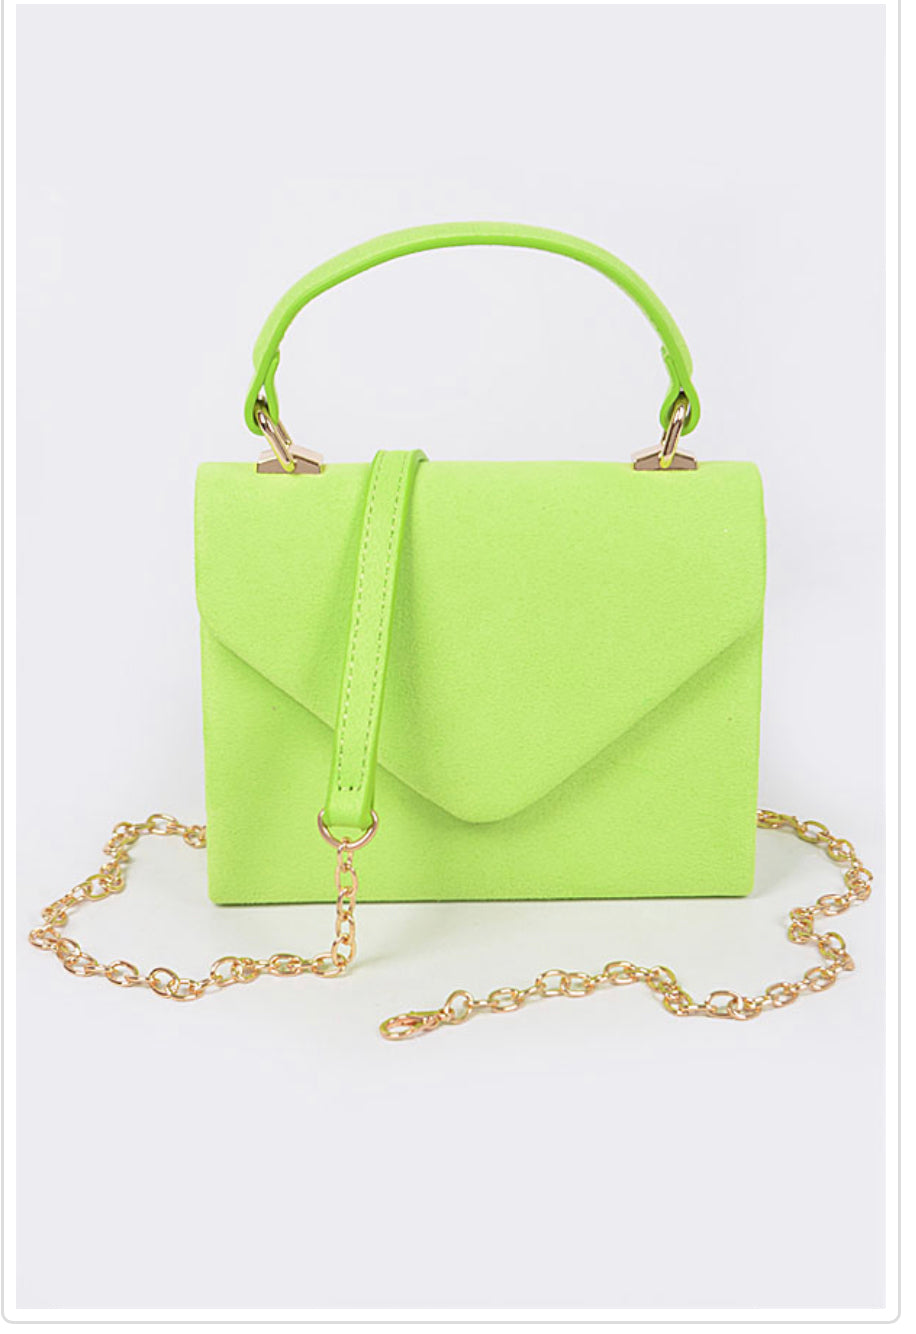 Josie_Leather_Bag_with_Studs_and_Chain_Strap_green_44_900x.jpg?v=1578382418